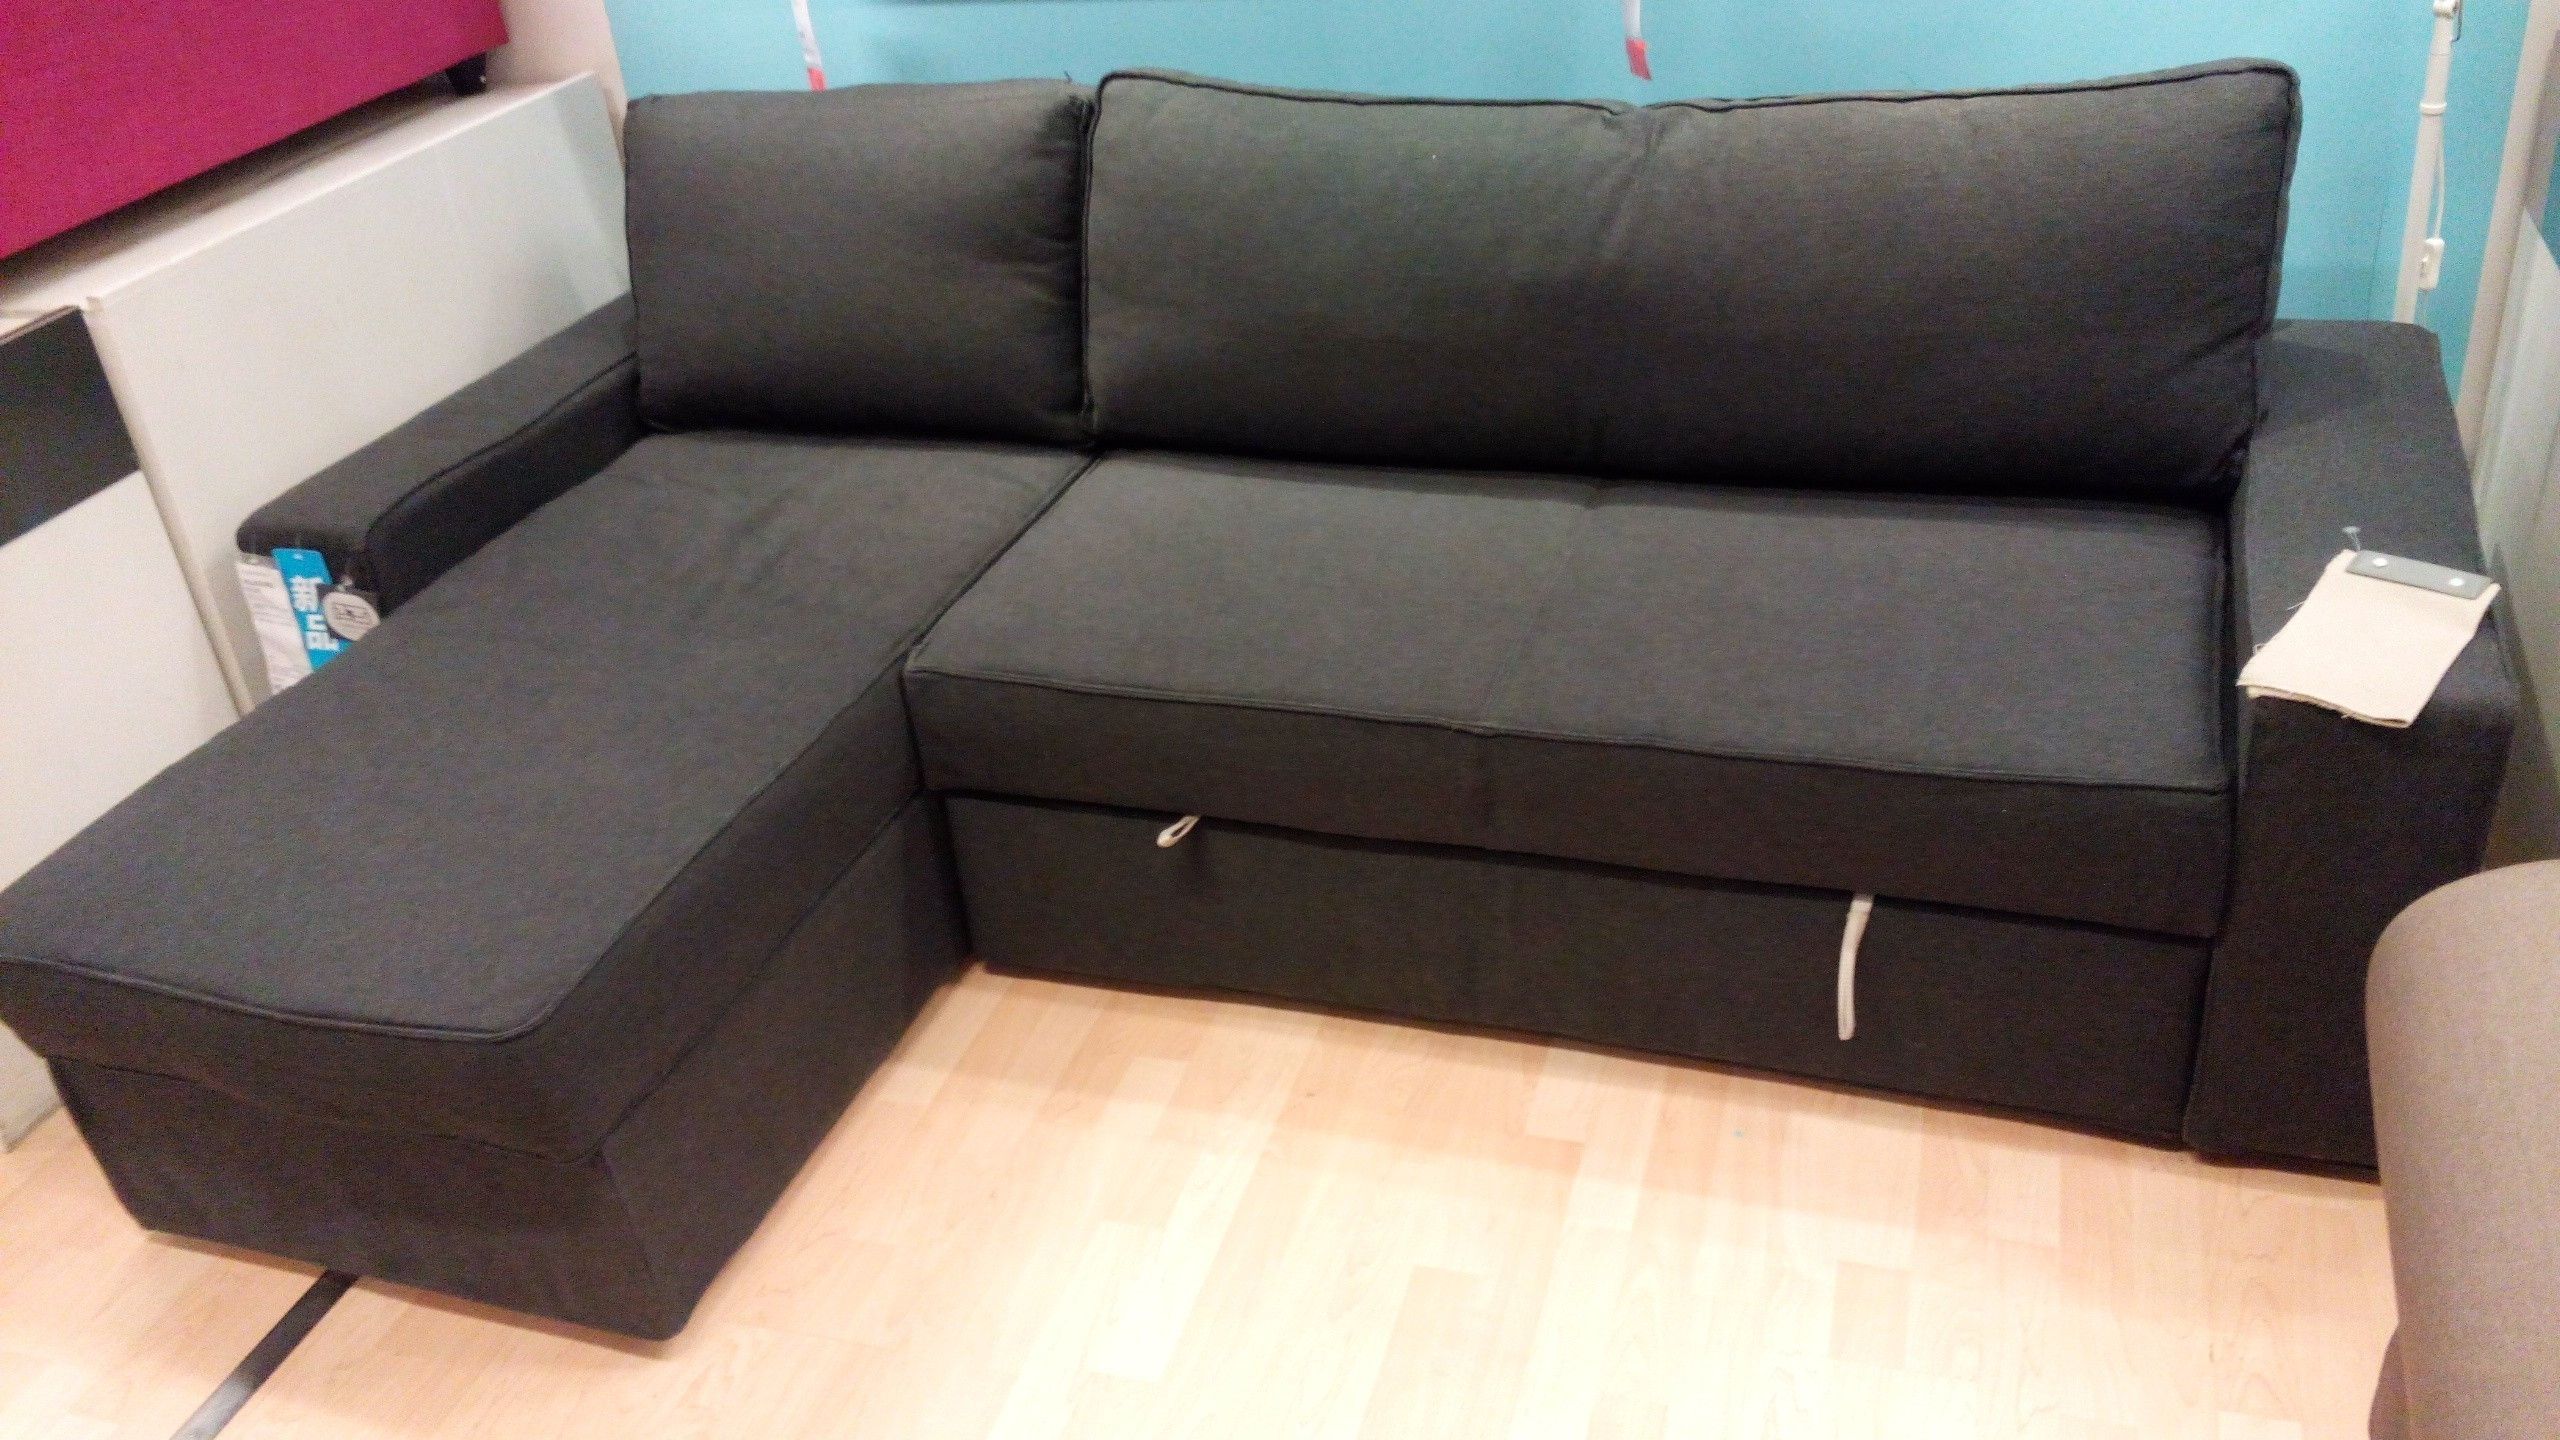 Sleeper Sofas Ikea Amazing Sectional Sofa Perfect #20839 Cozy Pertaining To Sectional Sofas At Ikea (Photo 9 of 10)